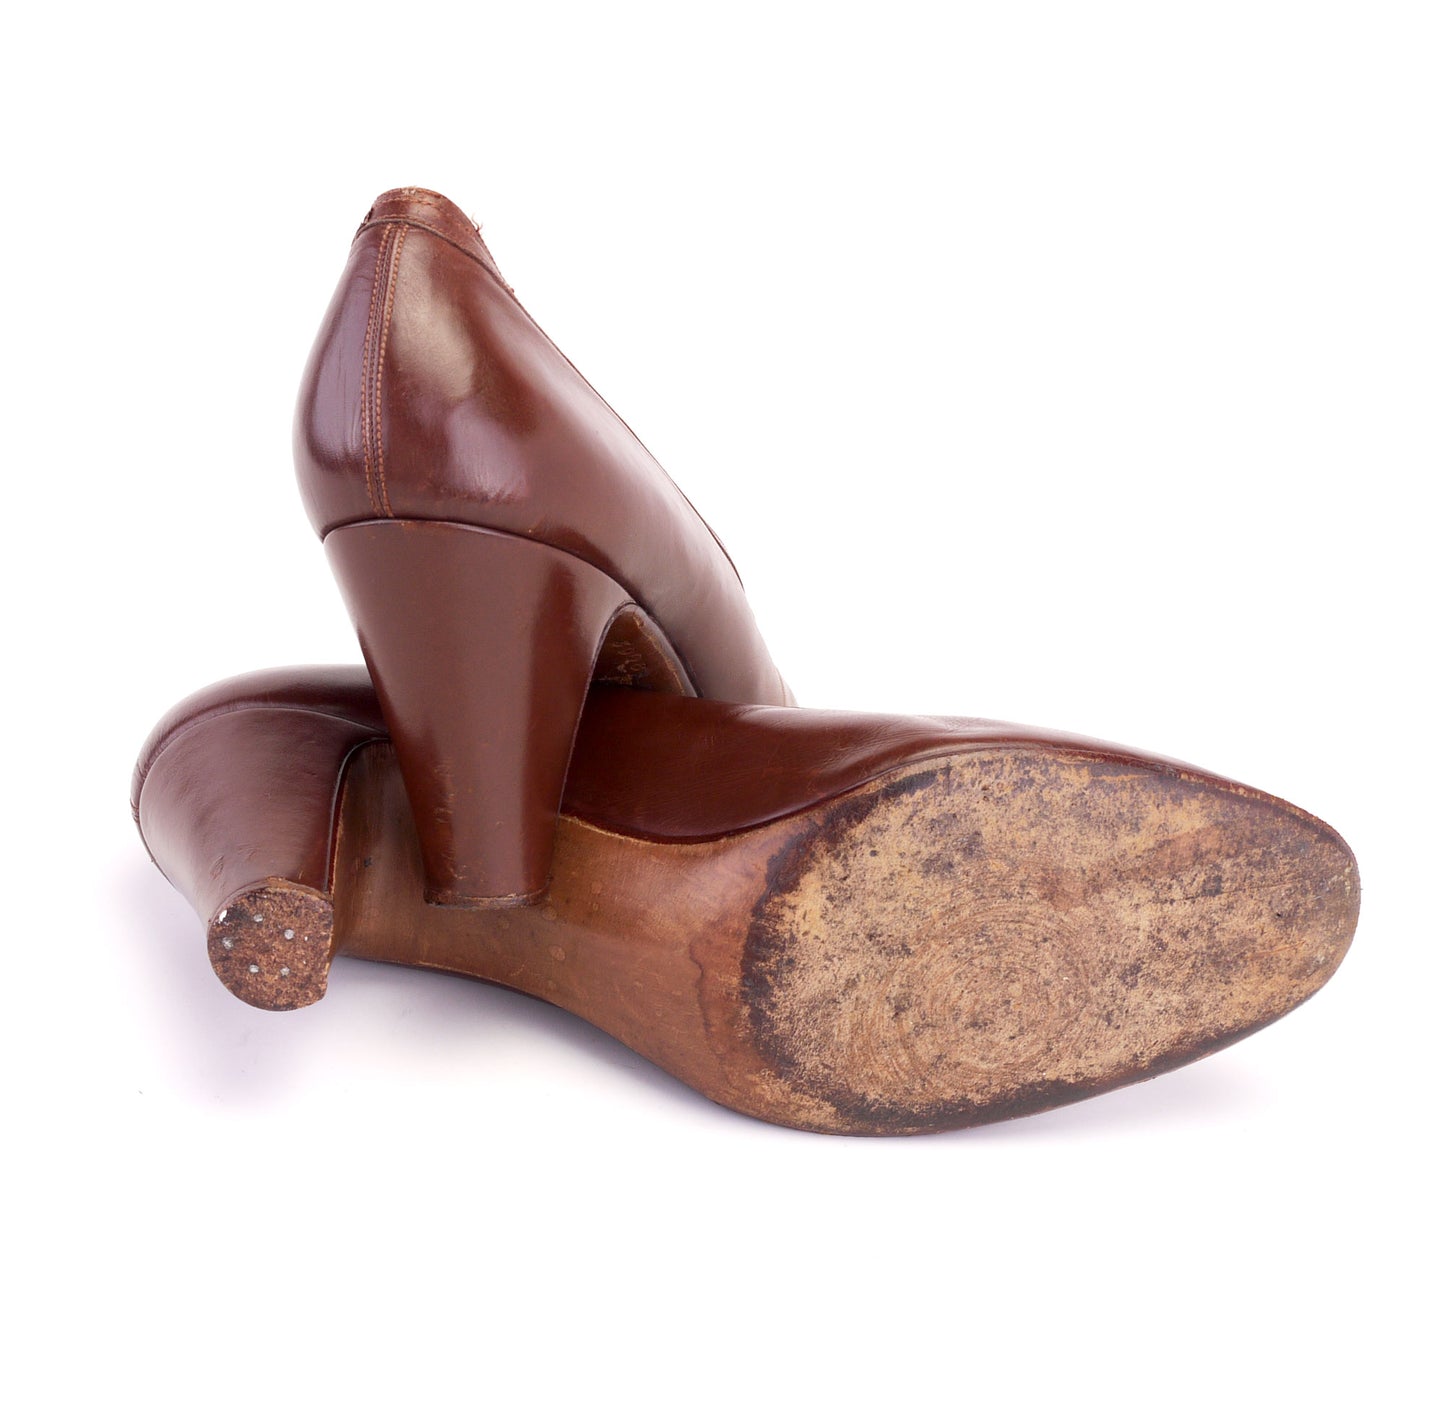 1930s Hellstern Brown Pumps with Plait UK 5.5